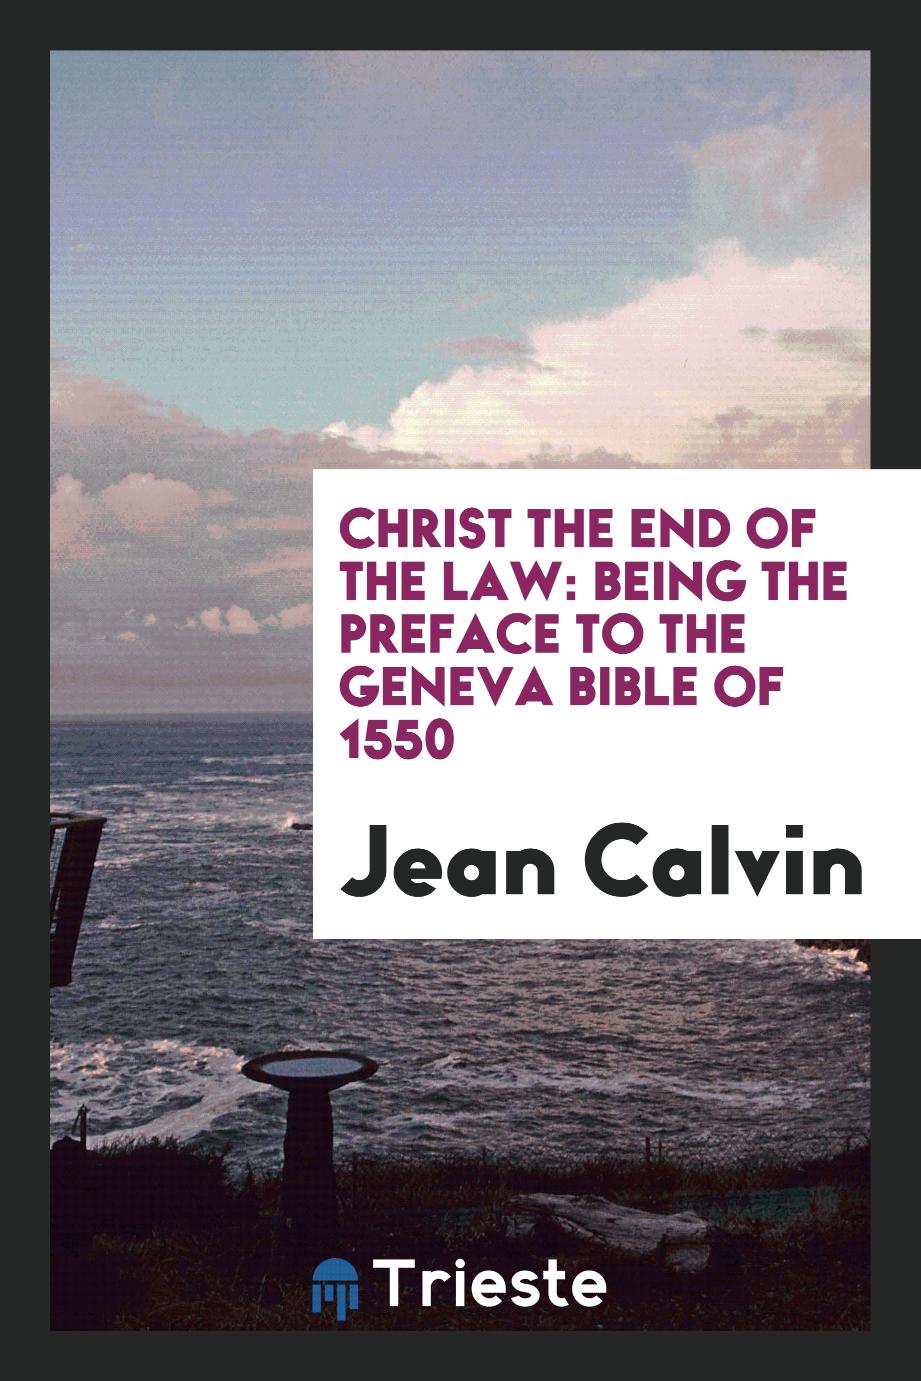 Christ the End of the Law: Being the Preface to the Geneva Bible of 1550